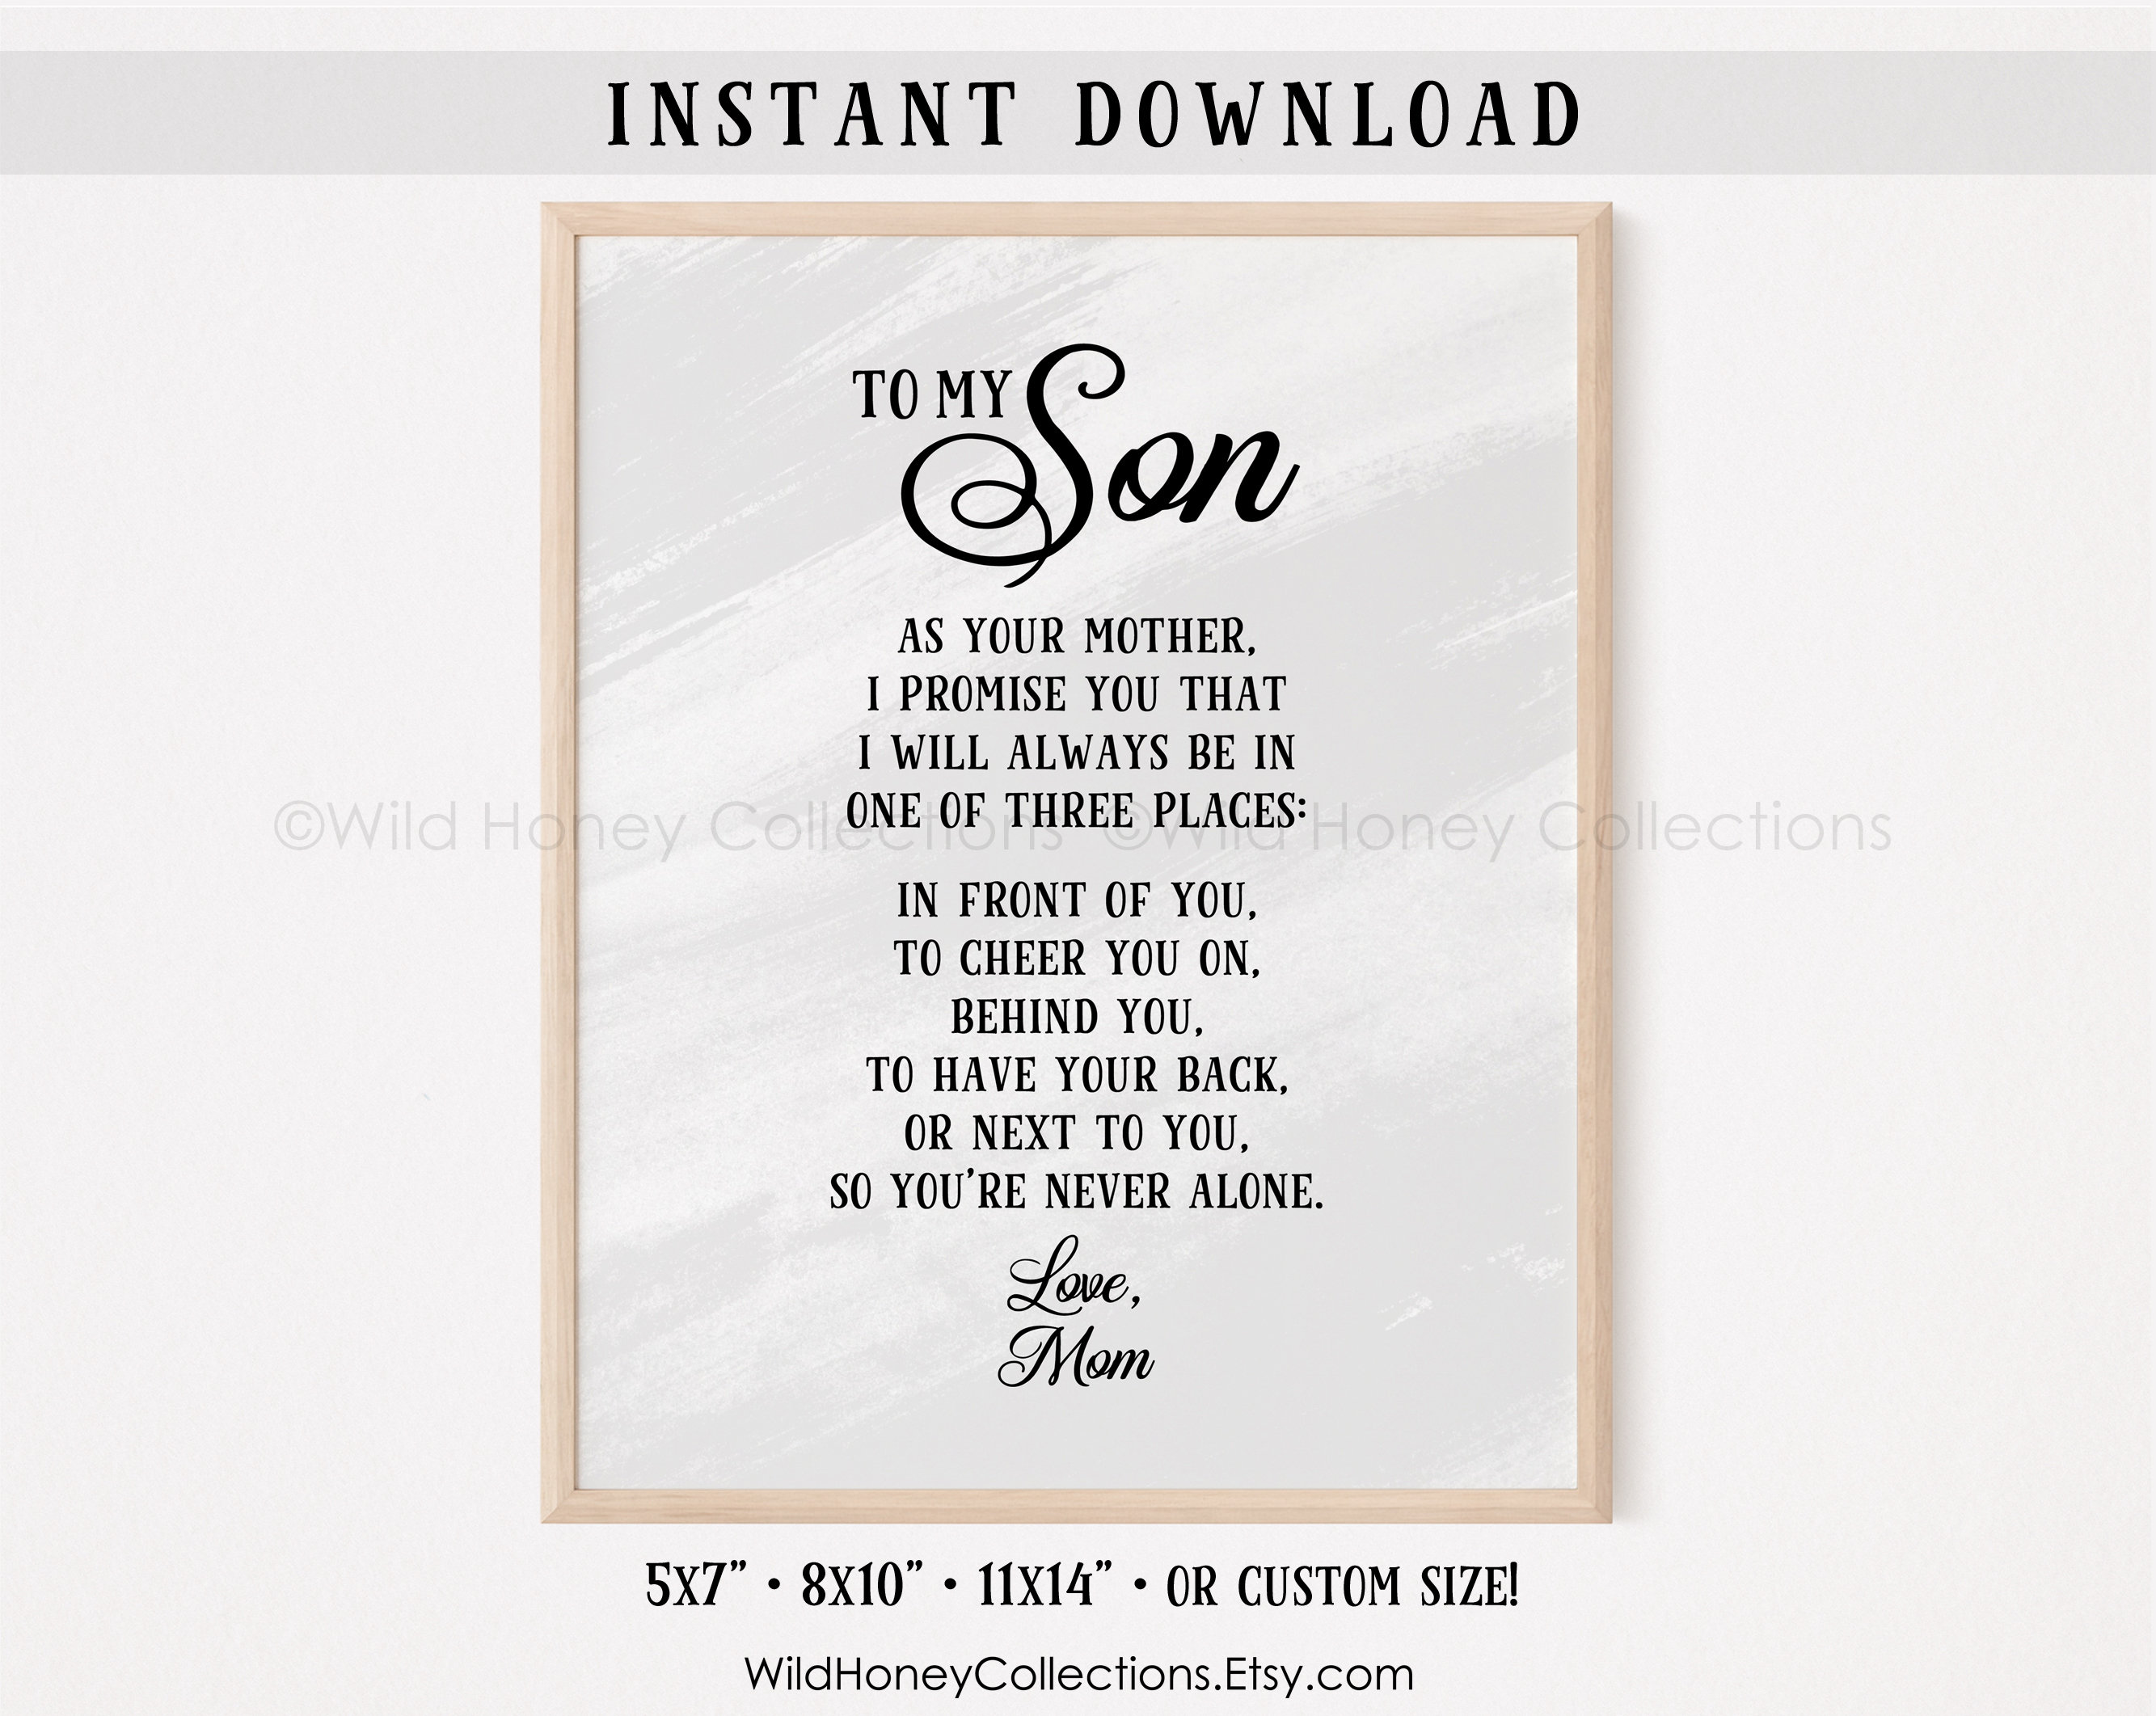 To My Son Printable Poem Mother to Son Gift Printable Wall image pic